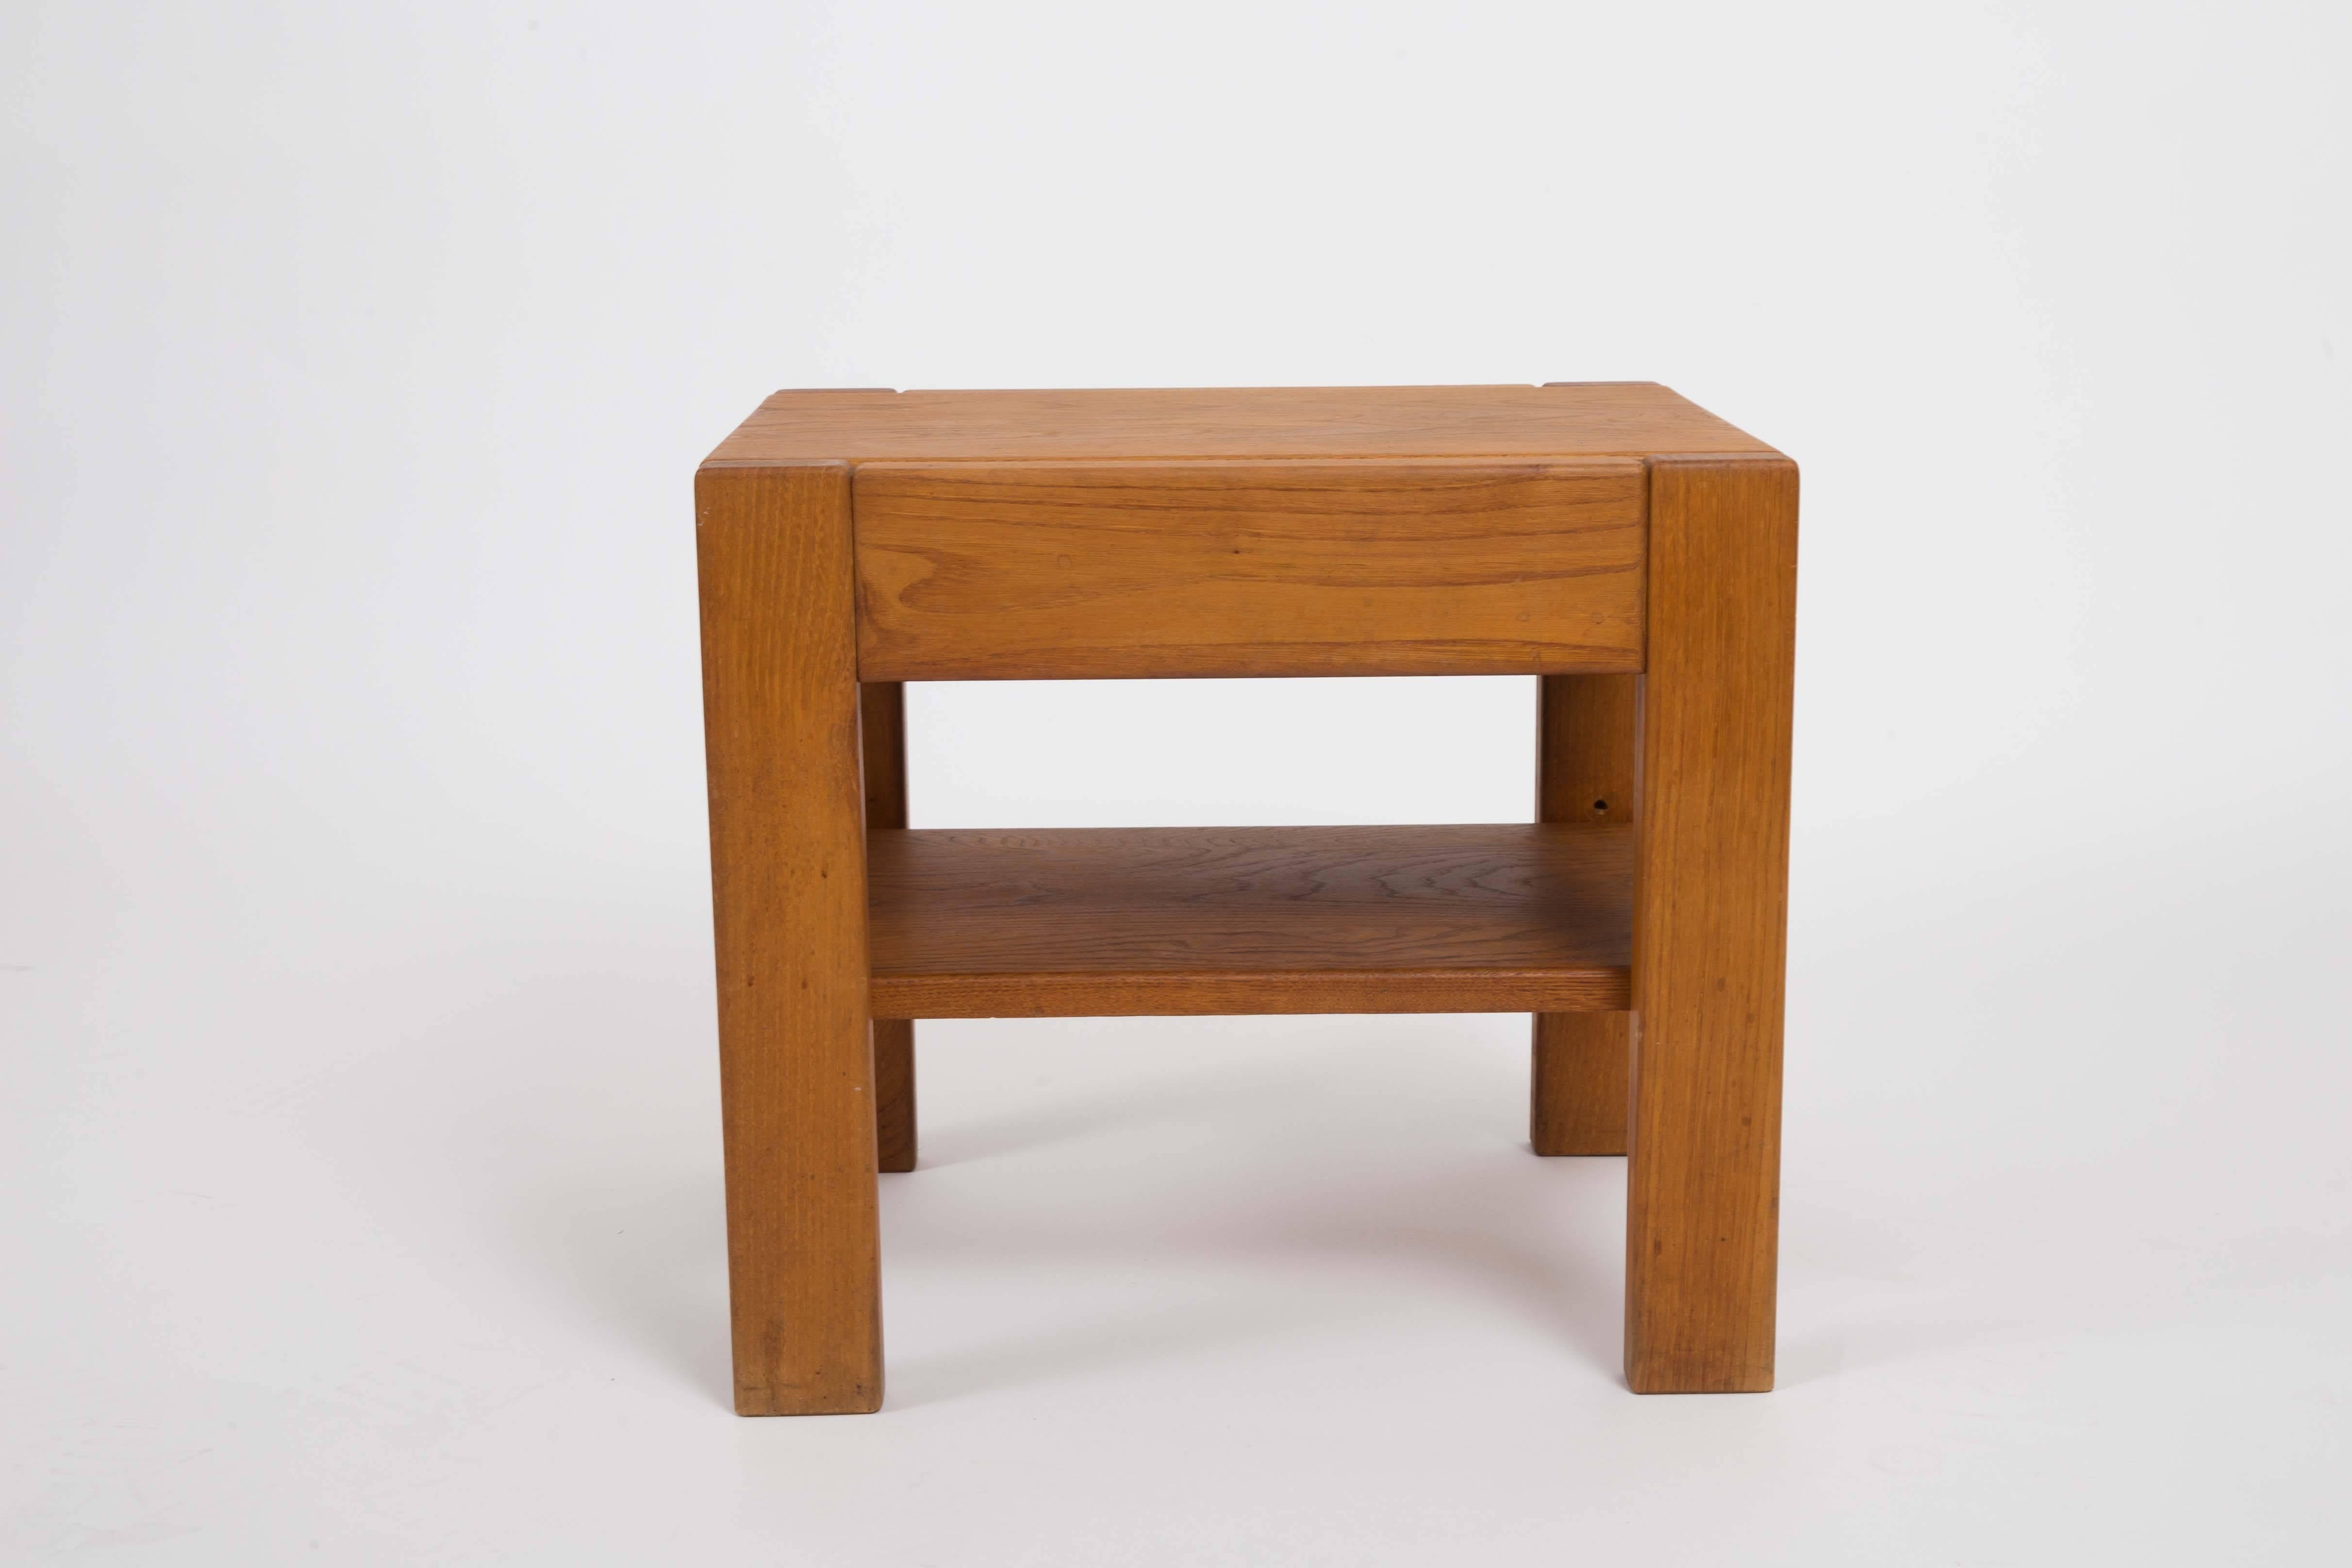 Wooden side table with adjustable lower shelf.